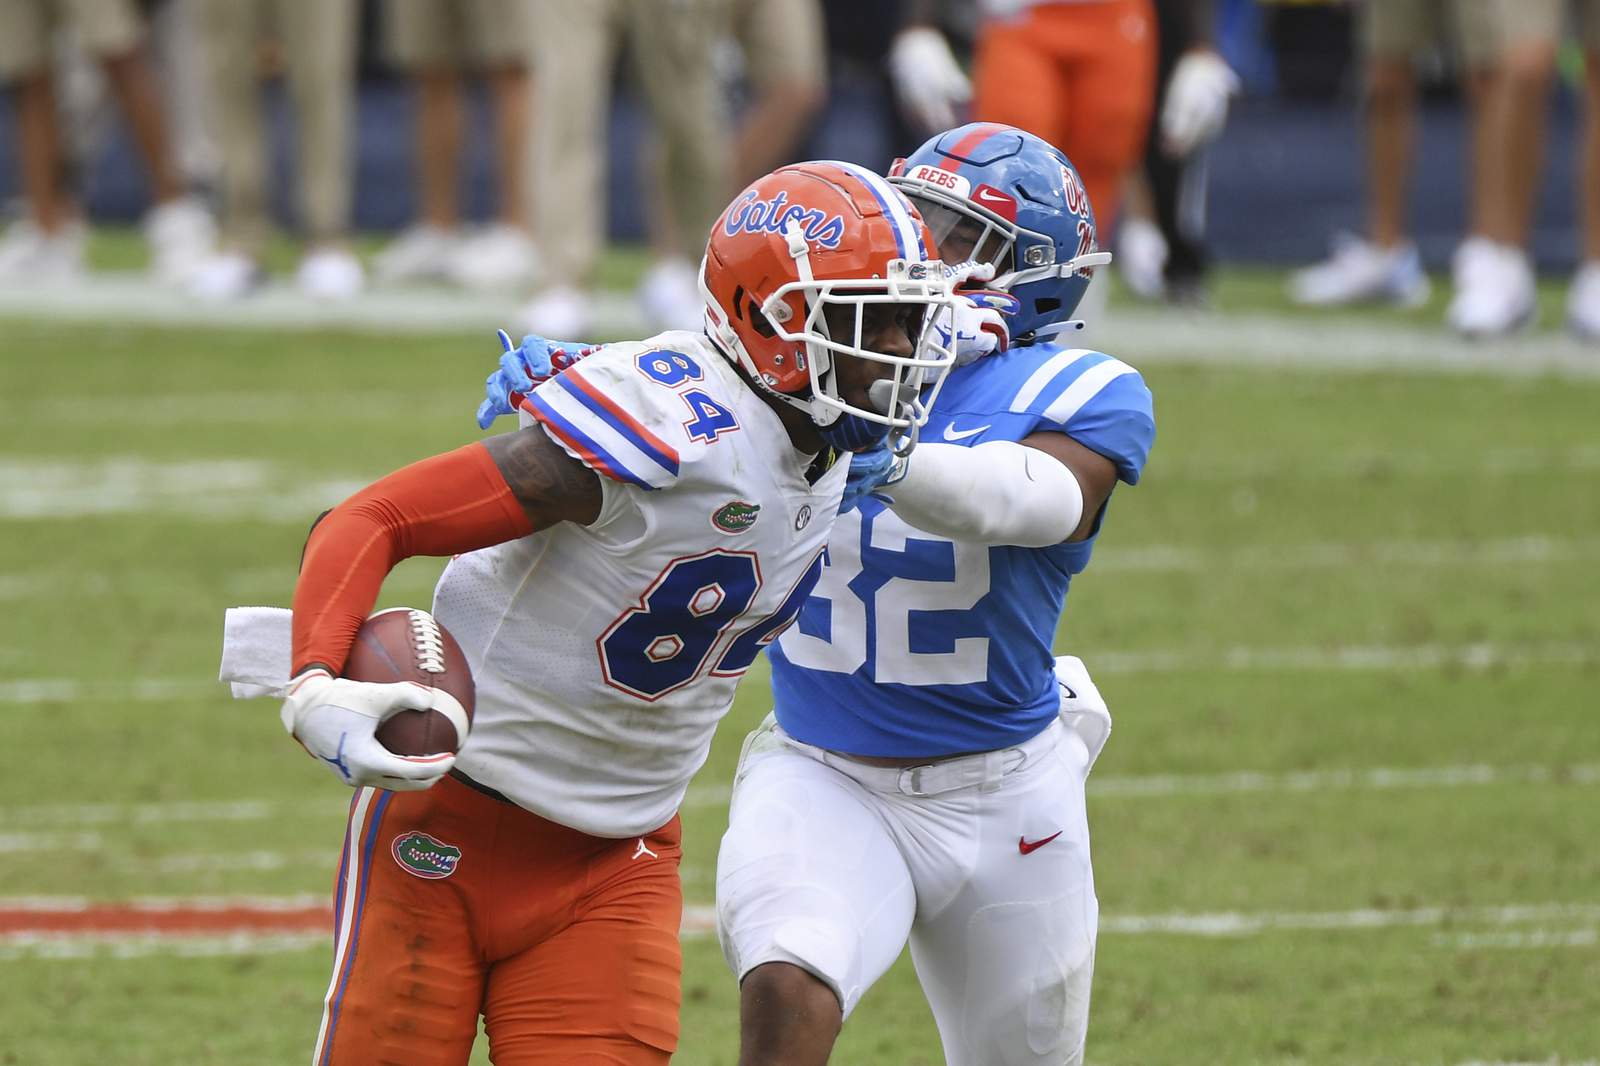 No. 5 Florida beats Ole Miss 51-35 in Kiffin's debut